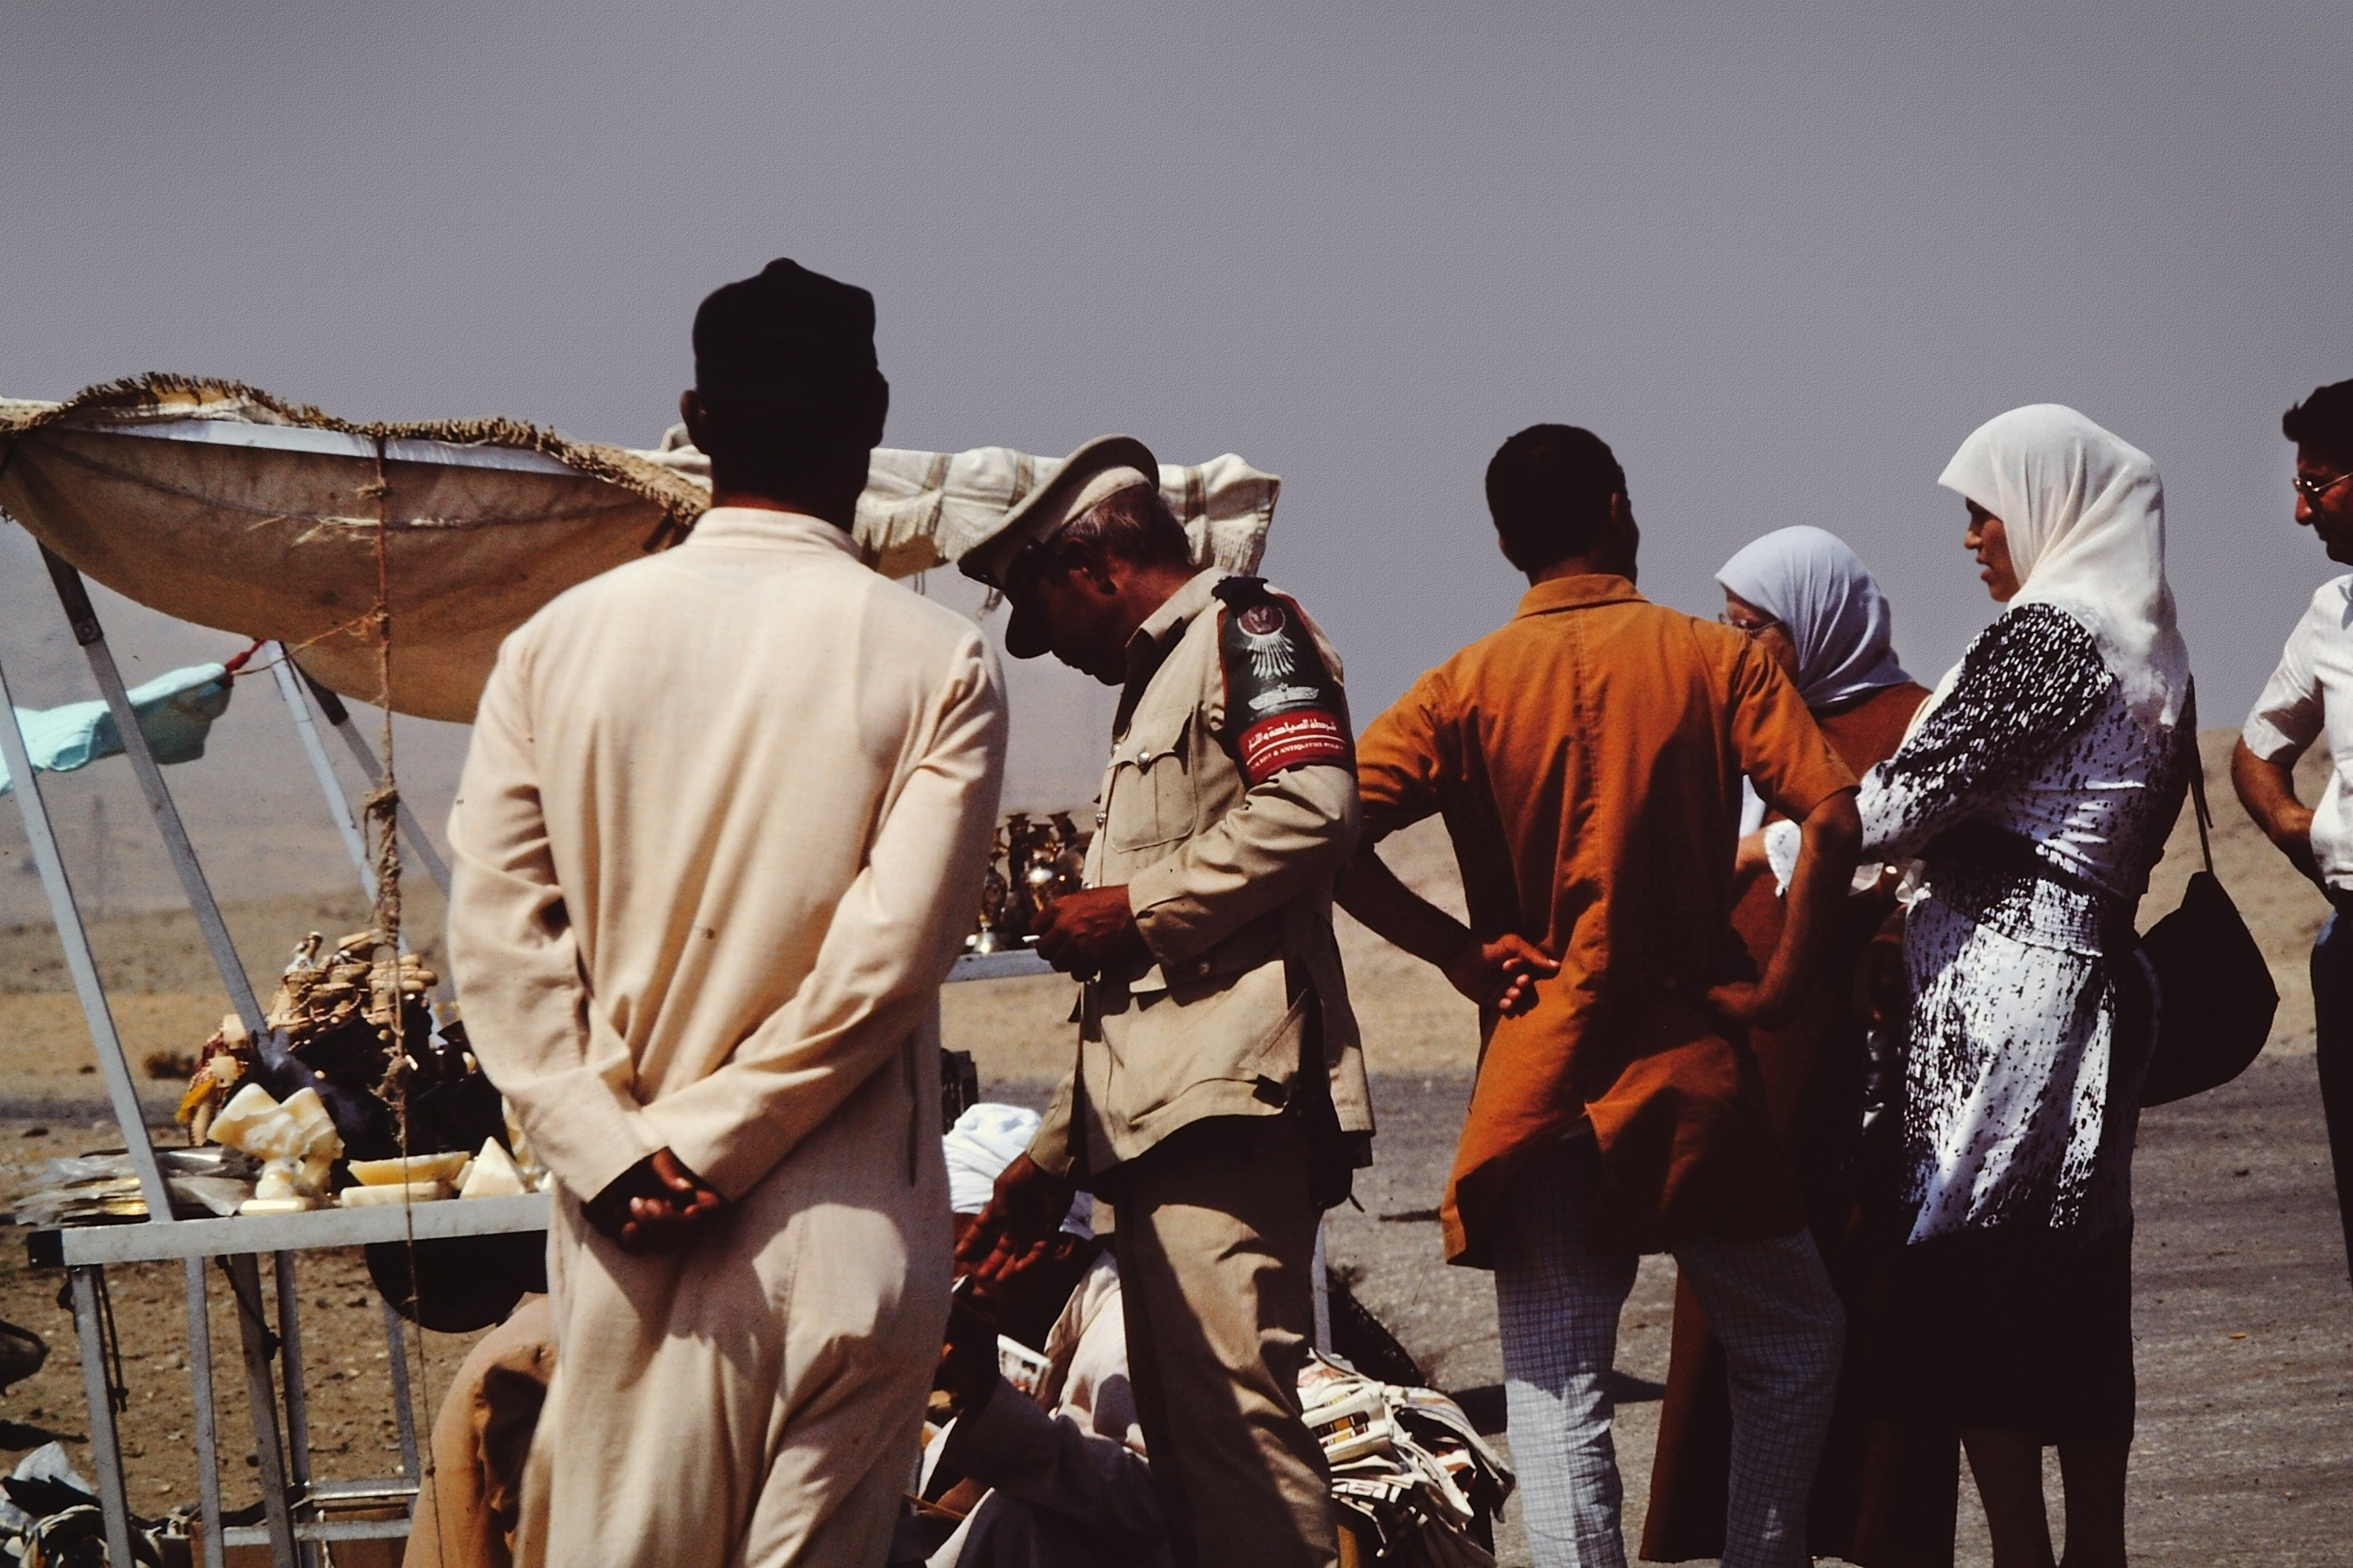 Group of people on desert beside brown tent photo